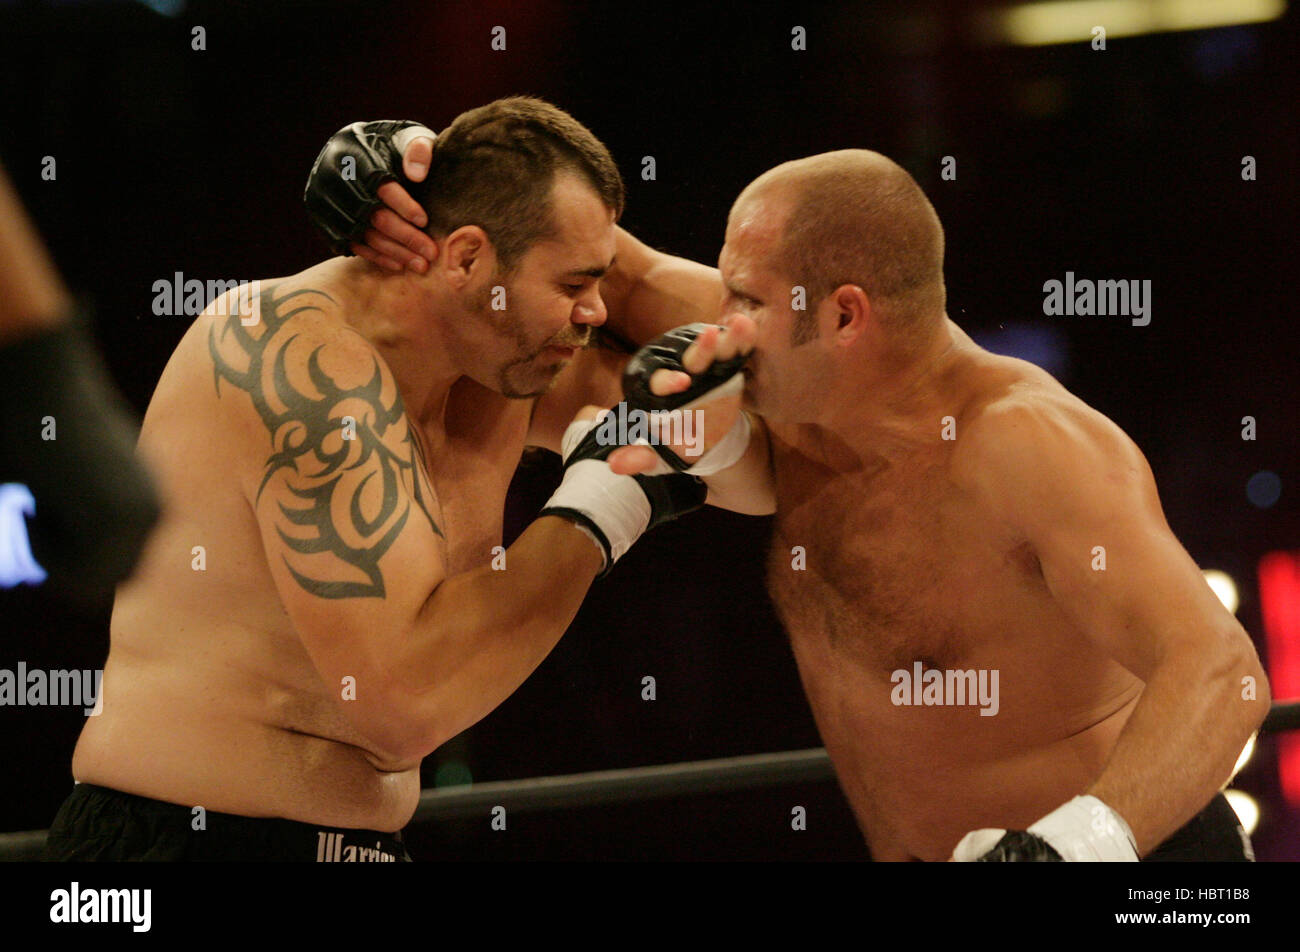 Fedor Emelianenko, right, fights Tim Sylvia at Affliction's 'Banned' a mixed martial arts fight at the Honda Center on July 19, 2008 in Anaheim, California. Francis Specker Stock Photo